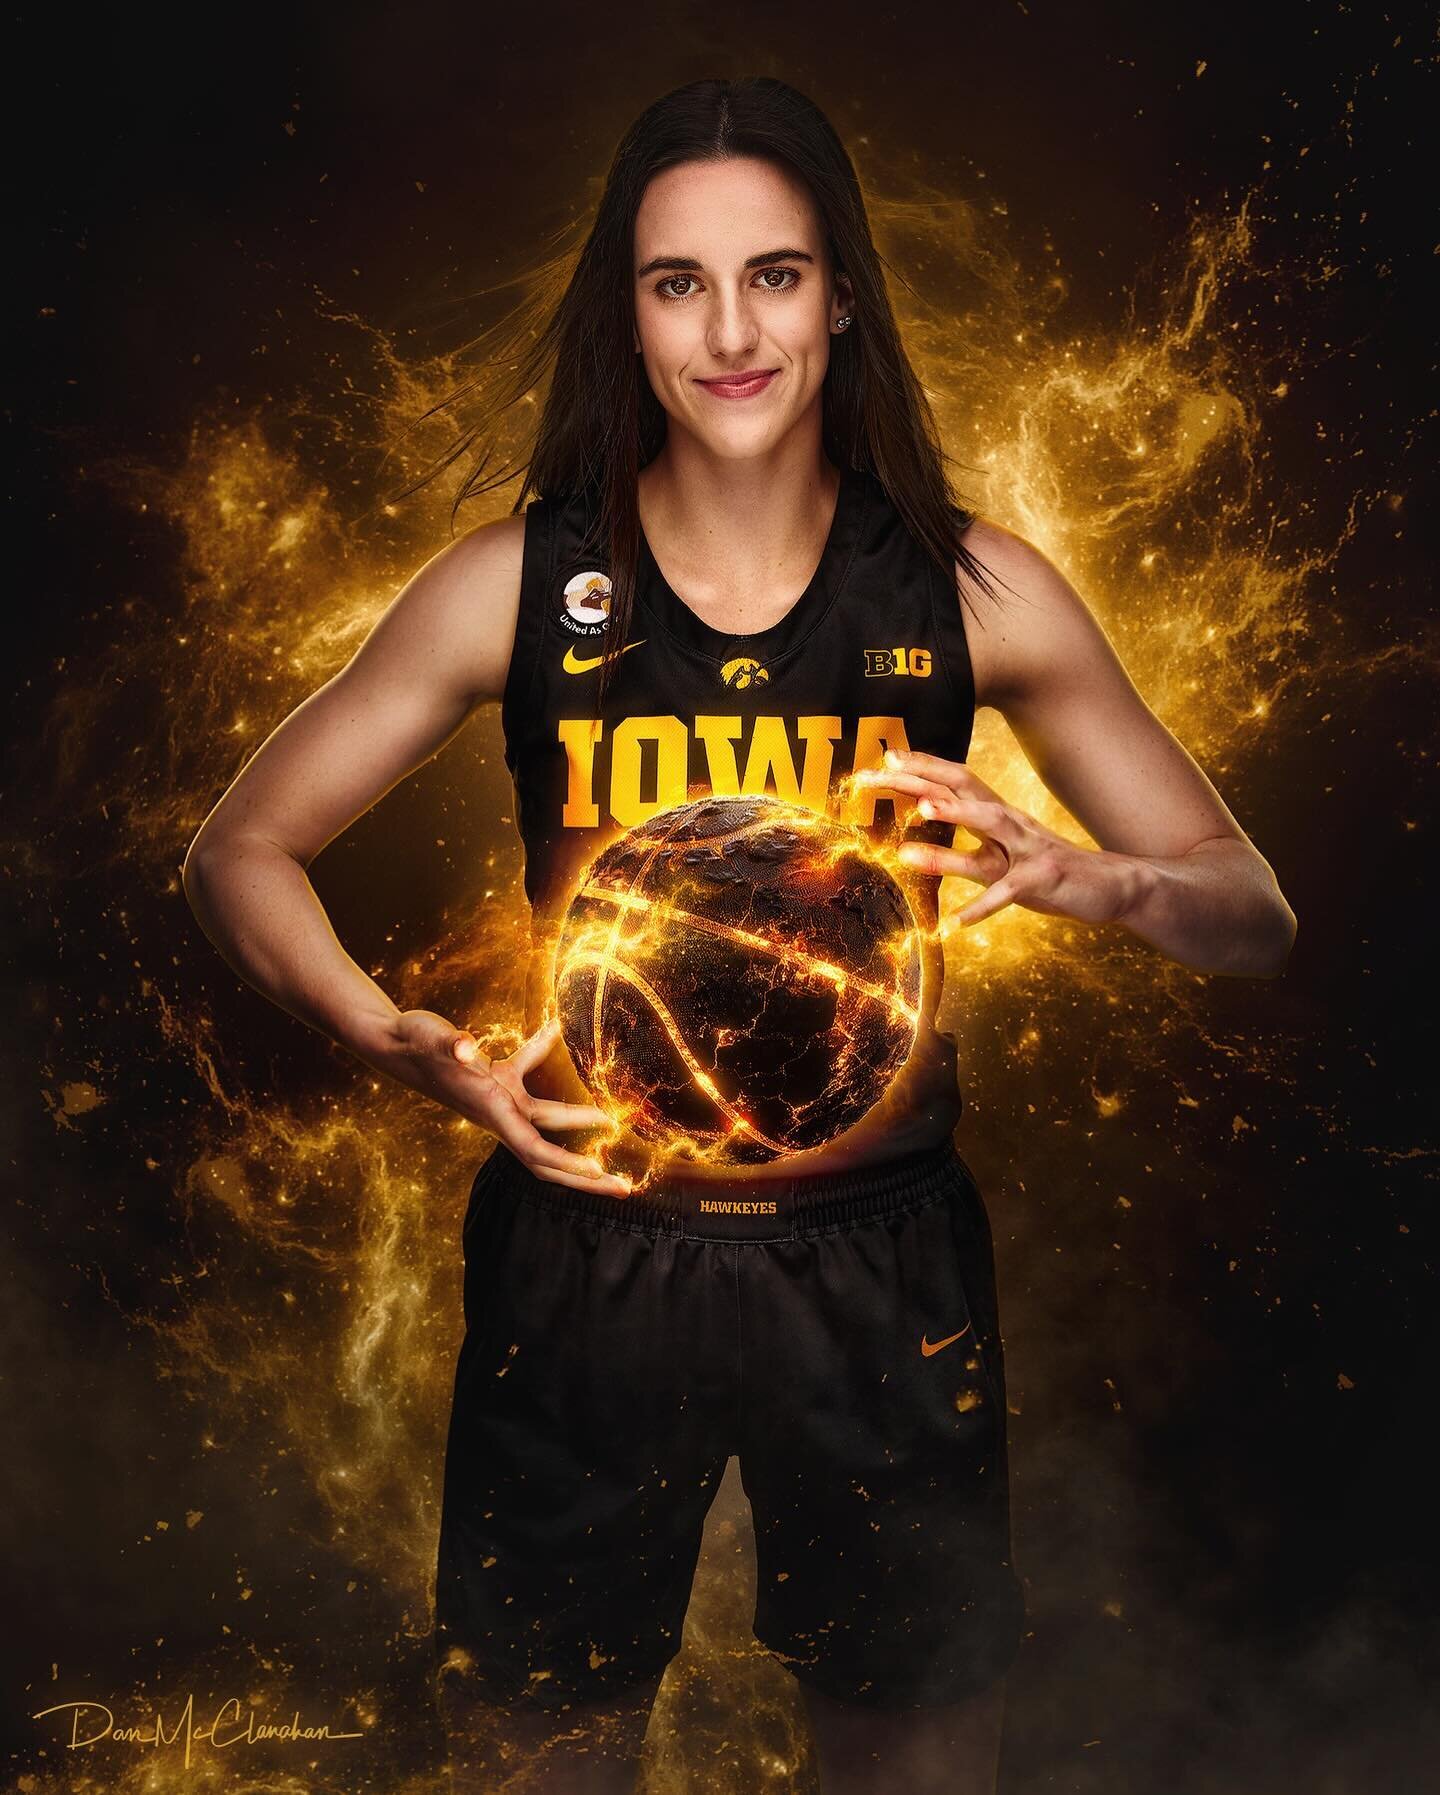 It&rsquo;s game day! I&rsquo;ve had the sincere pleasure of photographing @caitlinclark22 twice for @hyvee so I channeled my excitement for this tournament into making this hype composite from a frame captured at our last shoot. Fun facts: I have the